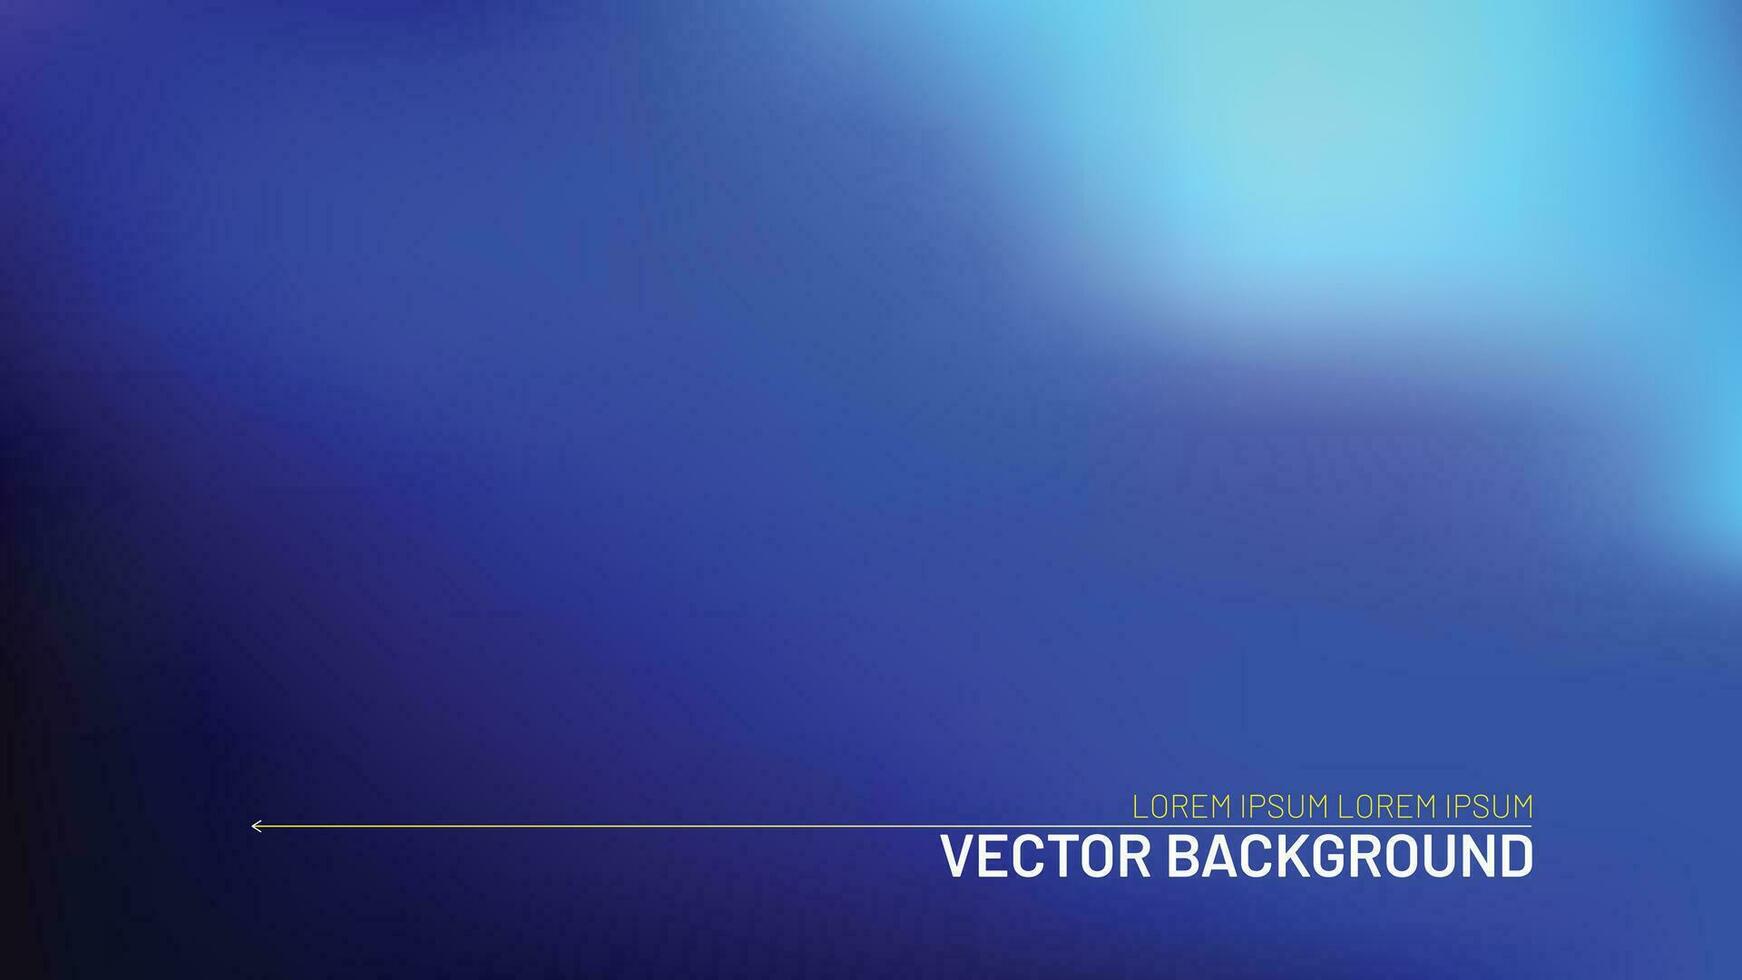 Abstract blurry blue ocean background vector